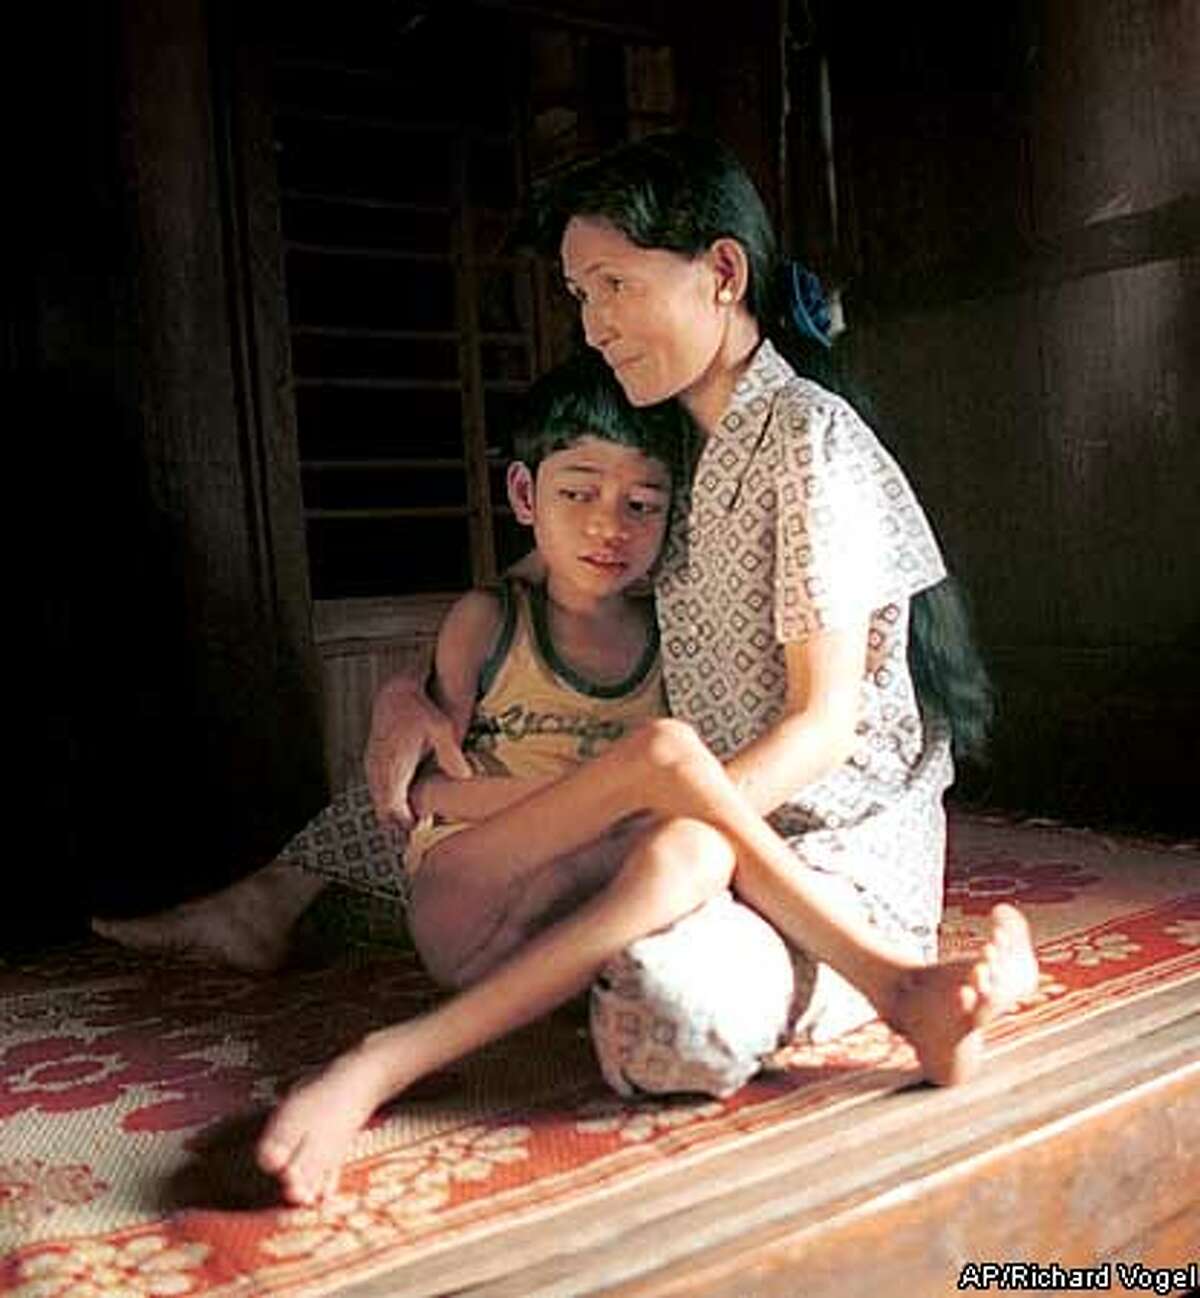 FOR USE WITH FEATURE TITLED 12-year-old Pham Quoc Huy is comforted by his mother on a bamboo cot in their home, Feb. 19, 2000, near his village of Dong Son, in the A Luoi valley of the Central Highlands, Vietnam. Pham is suffering from what his parents say are the effects of the jungle defolinat, Agent Orange, used heavily in the region by the U.S. armed forces during the Vietnam War. (AP Photo/Richard Vogel)